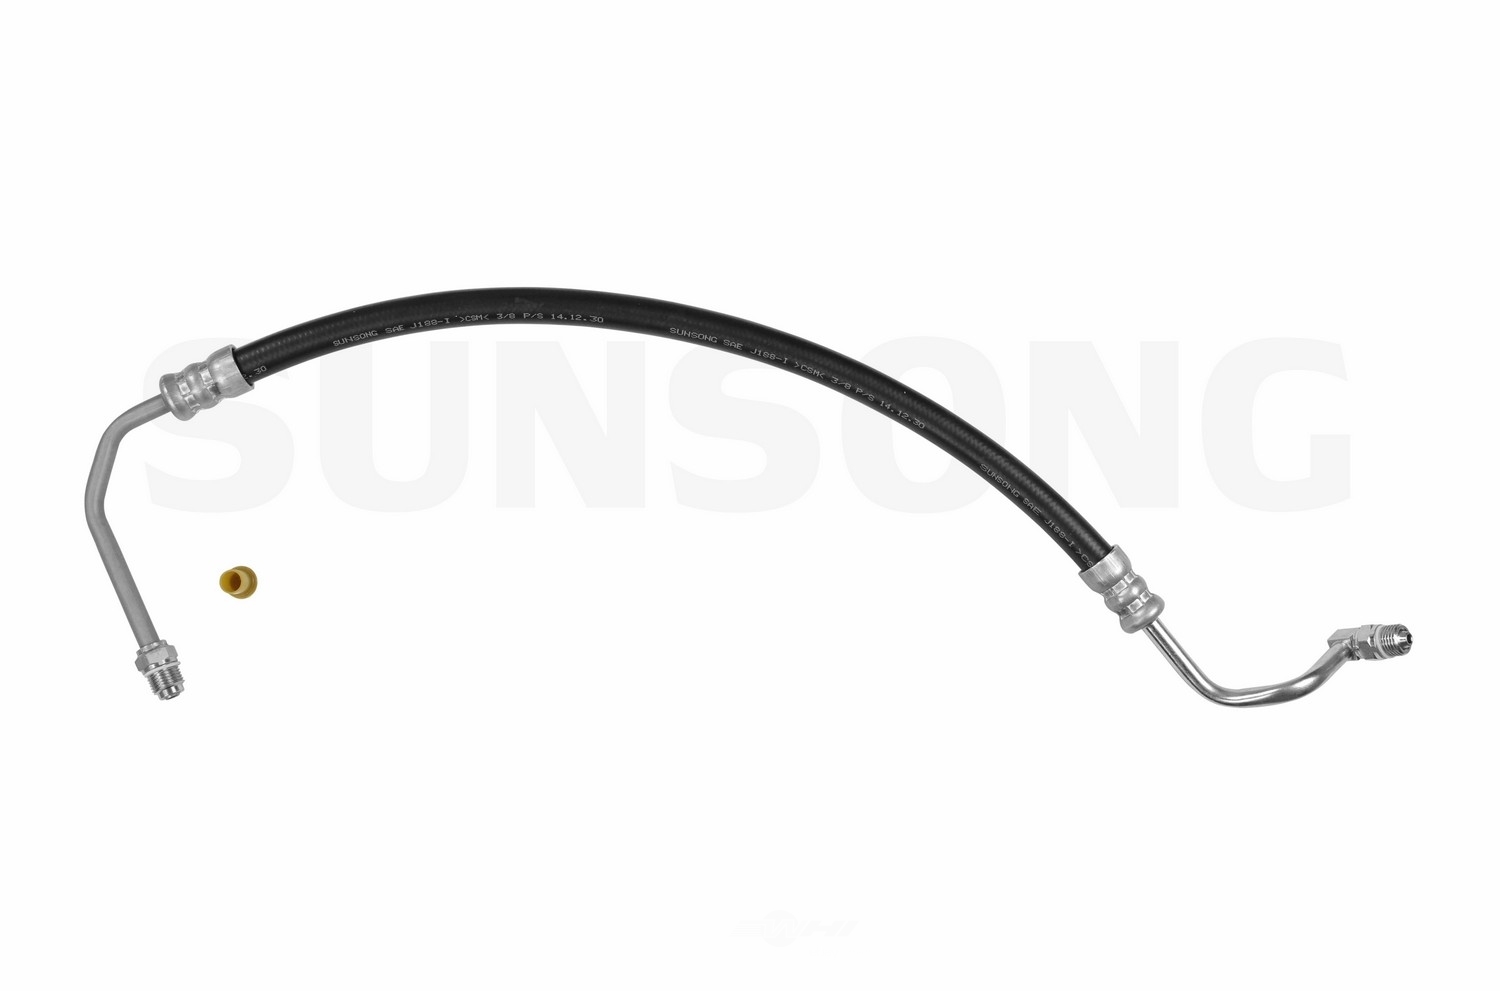 SUNSONG NORTH AMERICA - Power Steering Pressure Line Hose Assembly (Pump To Hydroboost) - SUG 3401095